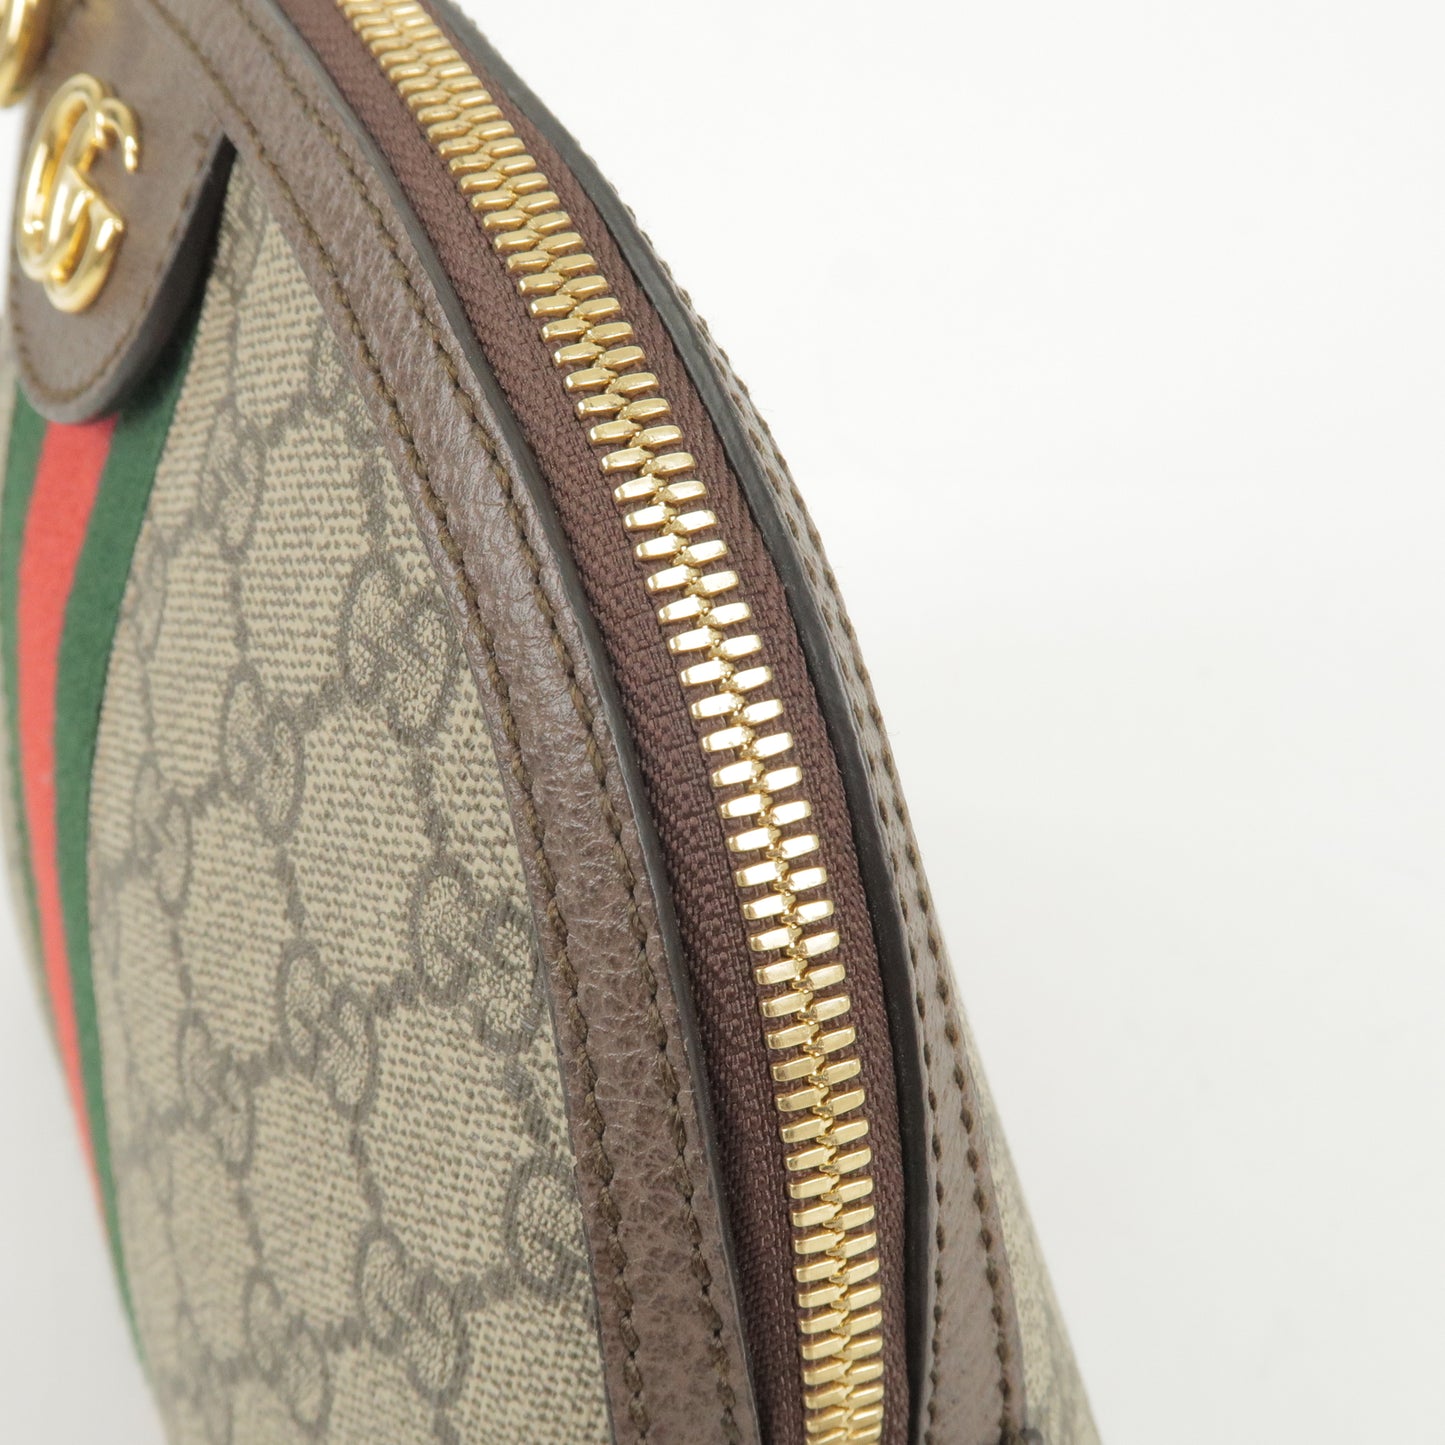 GUCCI Ophidia Sherry GG Supreme Leather Shoulder Bag 499621